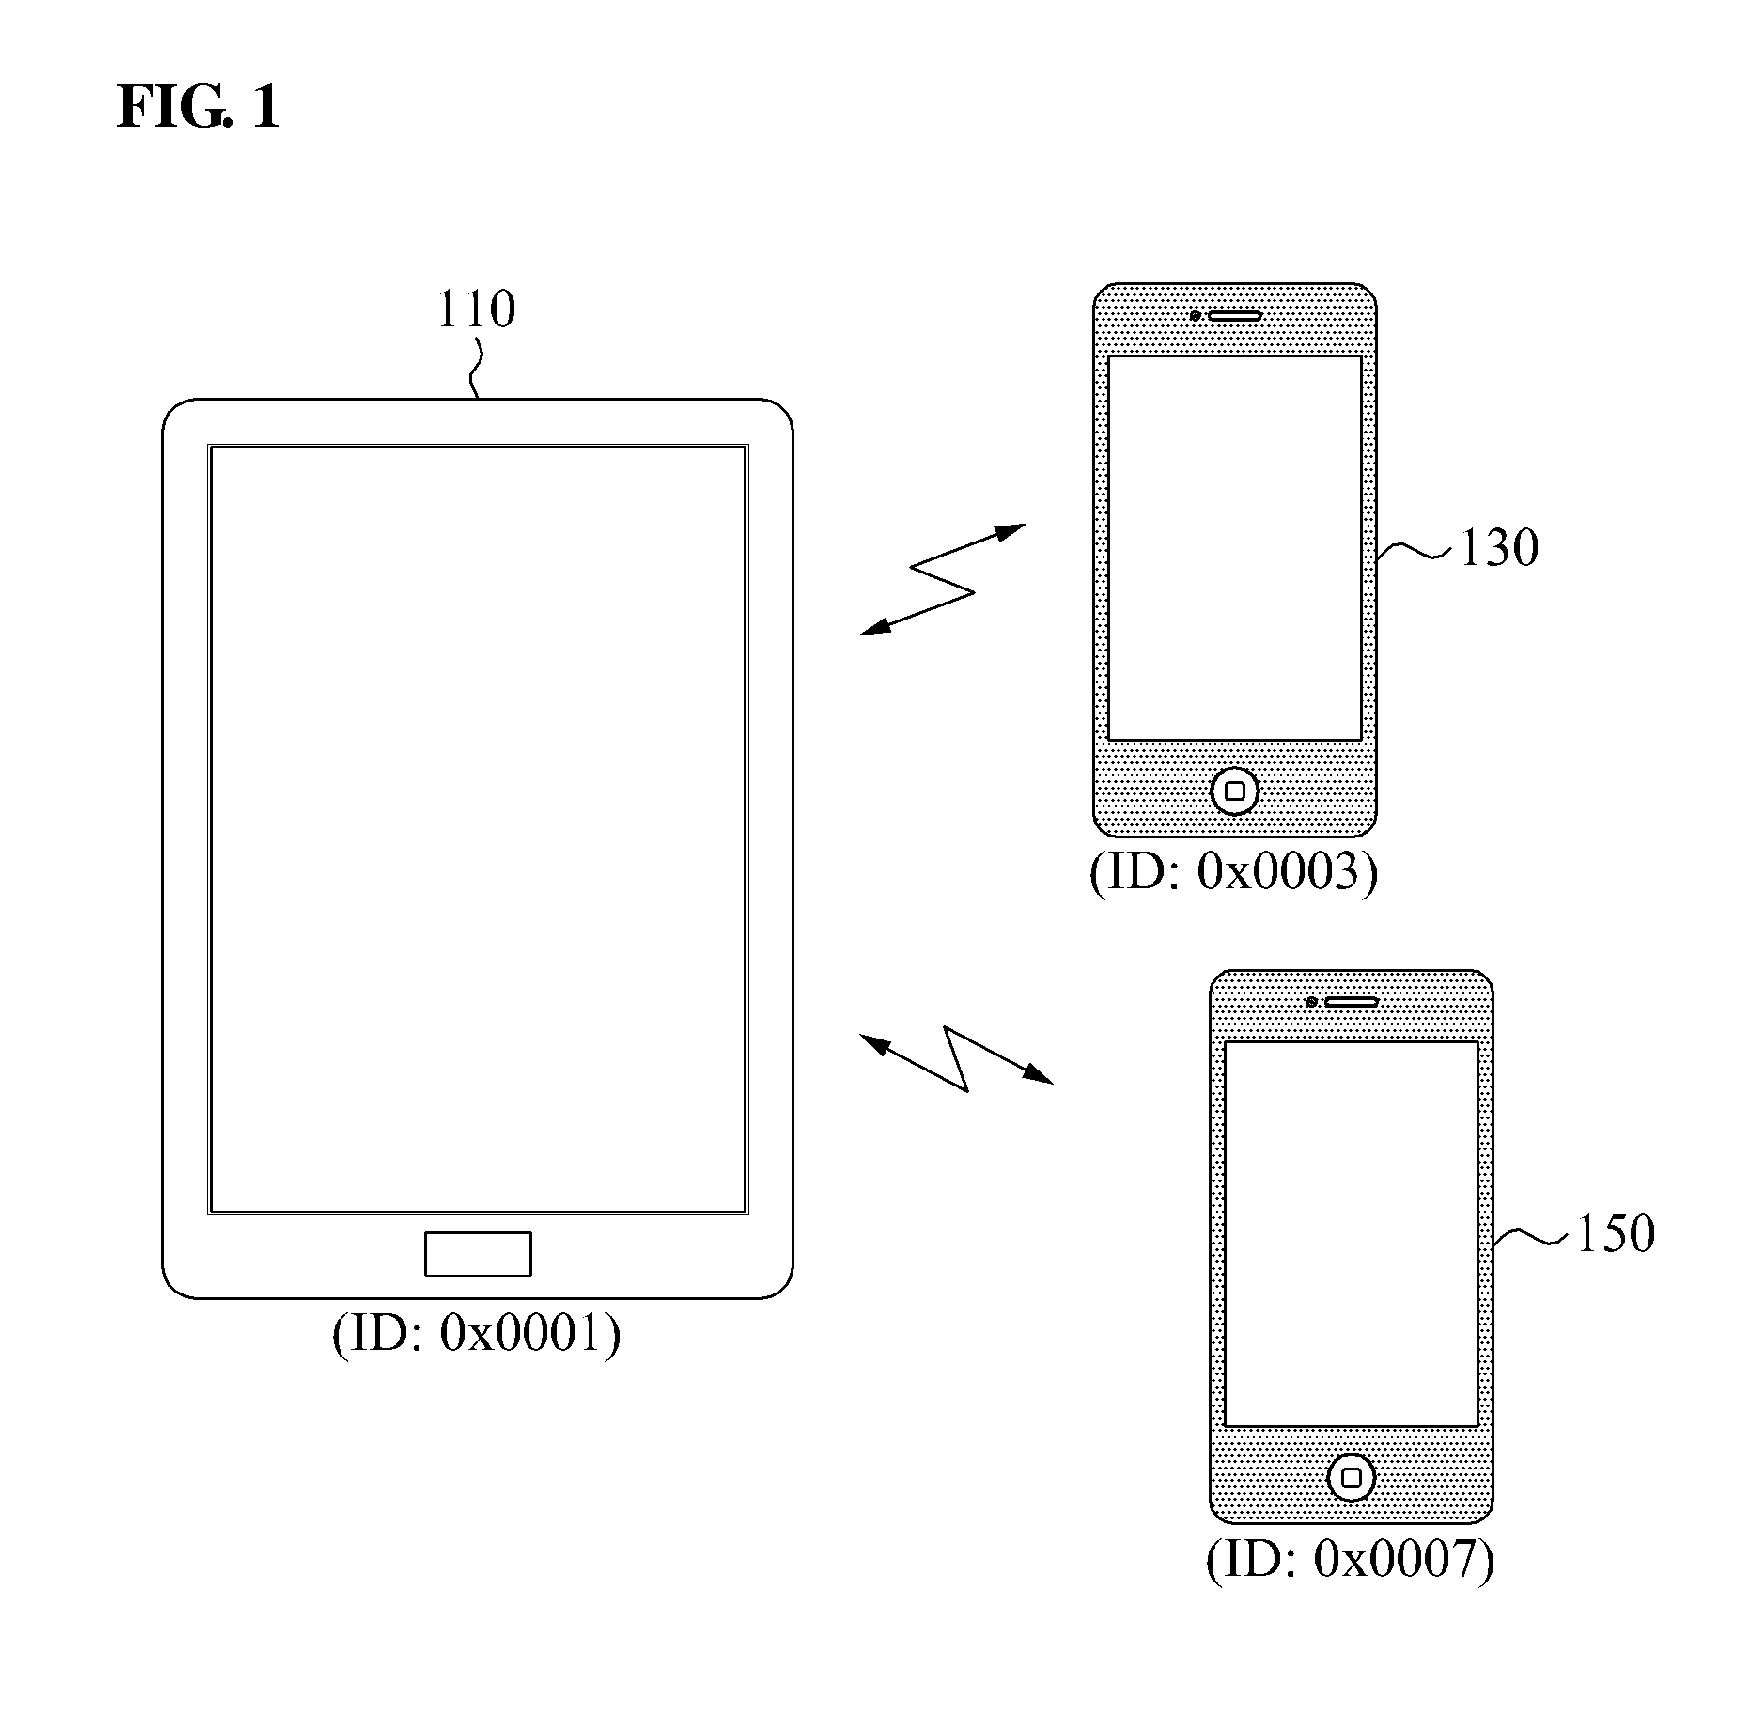 Apparatus and method for sharing energy in wireless device